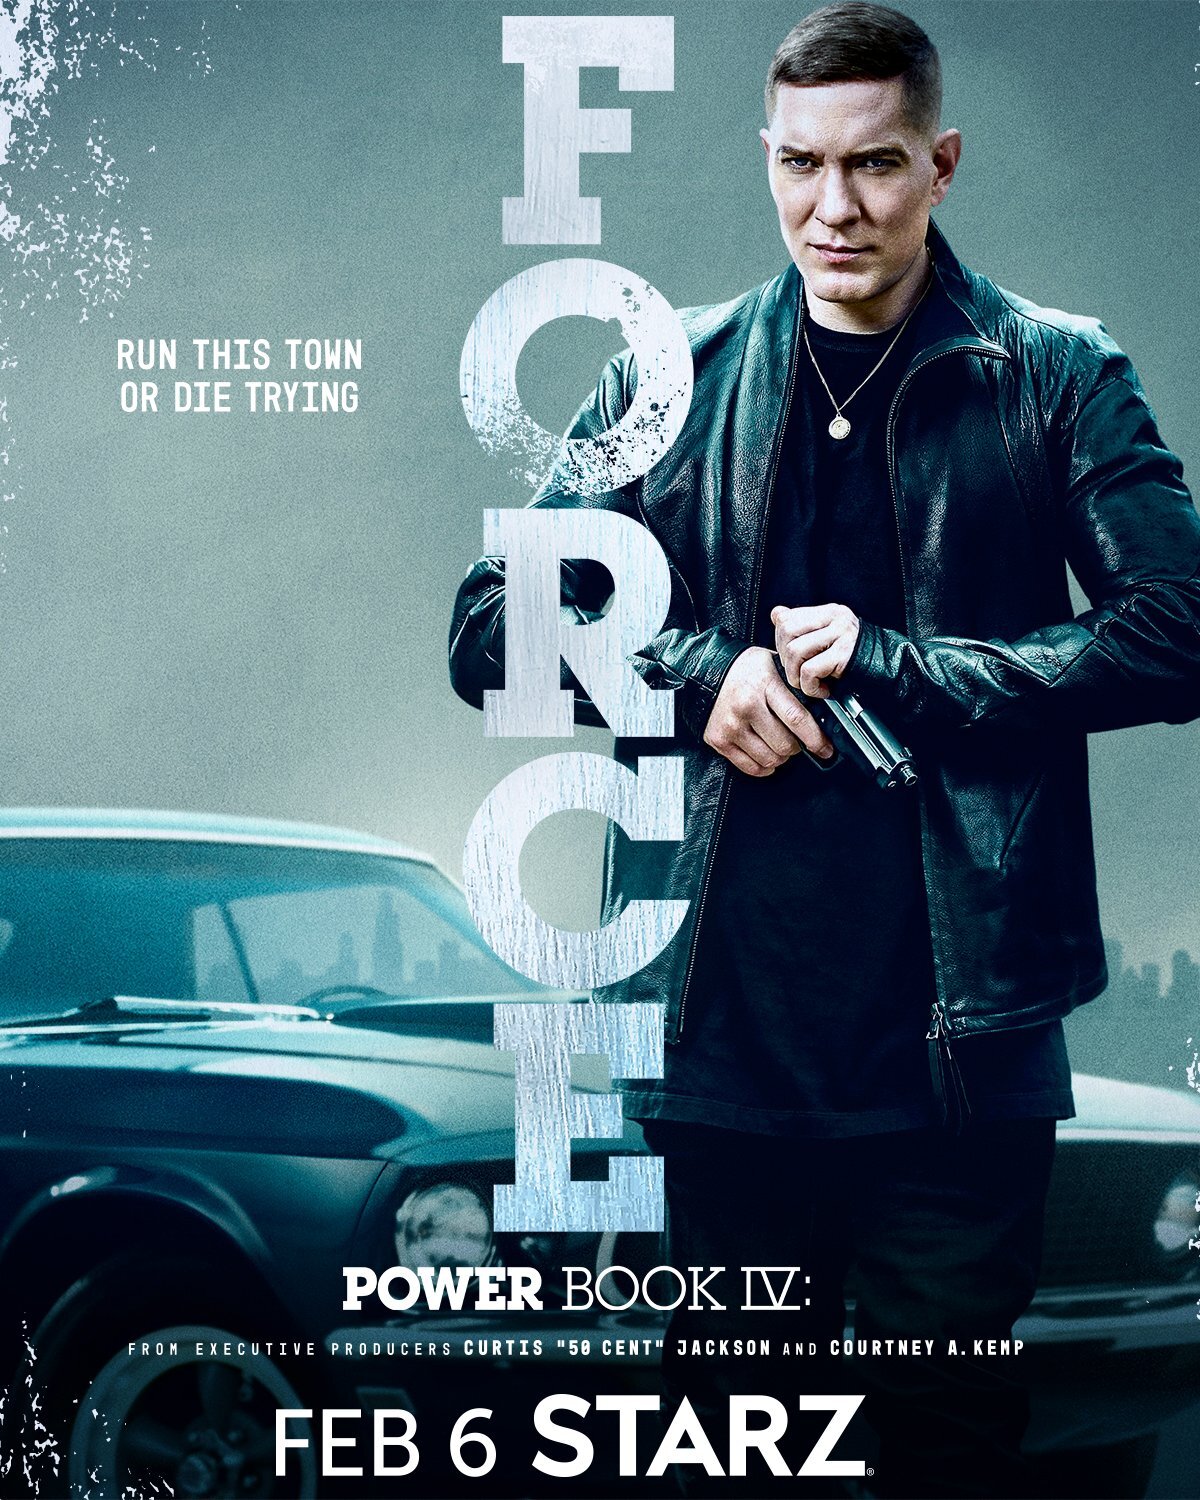 New Clip From Starz Original Series 'Power Book IV: Force' - Season 1, Episode 4